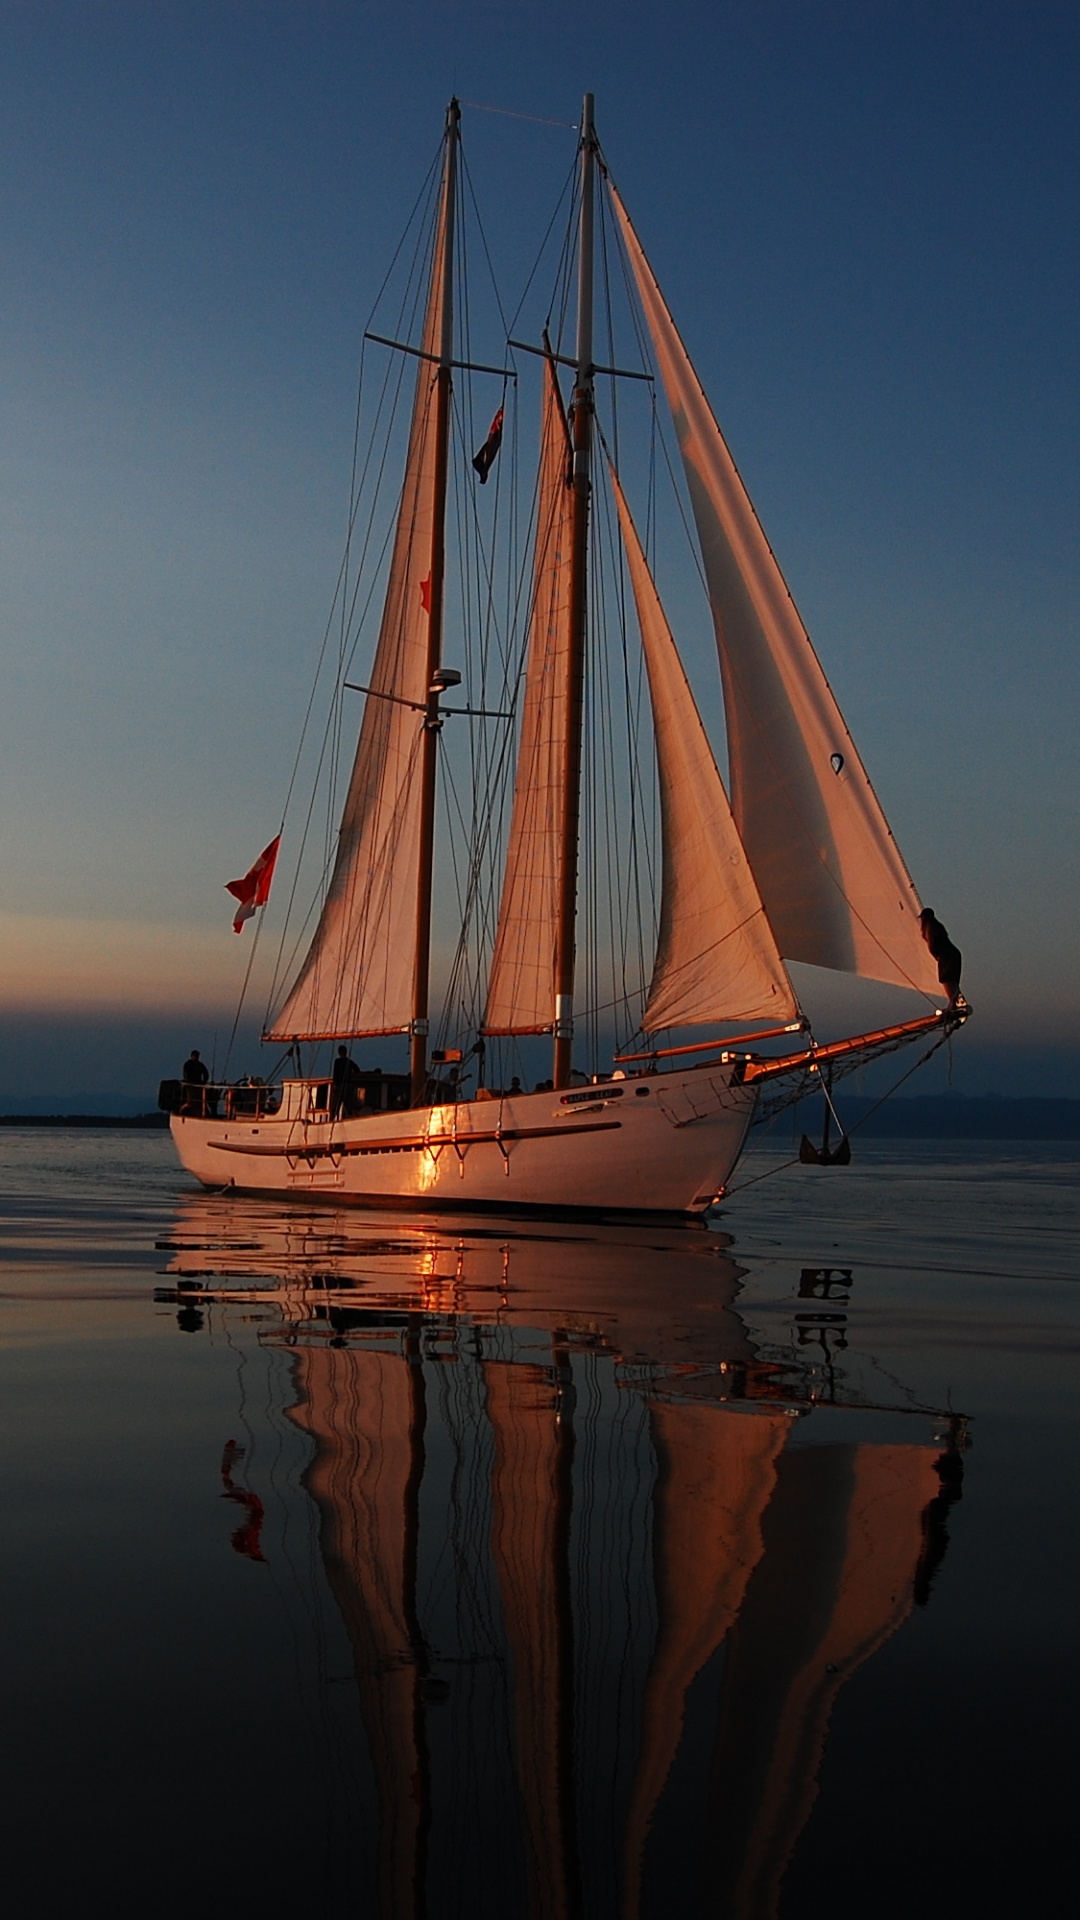 White Sail Boat on Sea During Sunset. Wallpaper in 1080x1920 Resolution